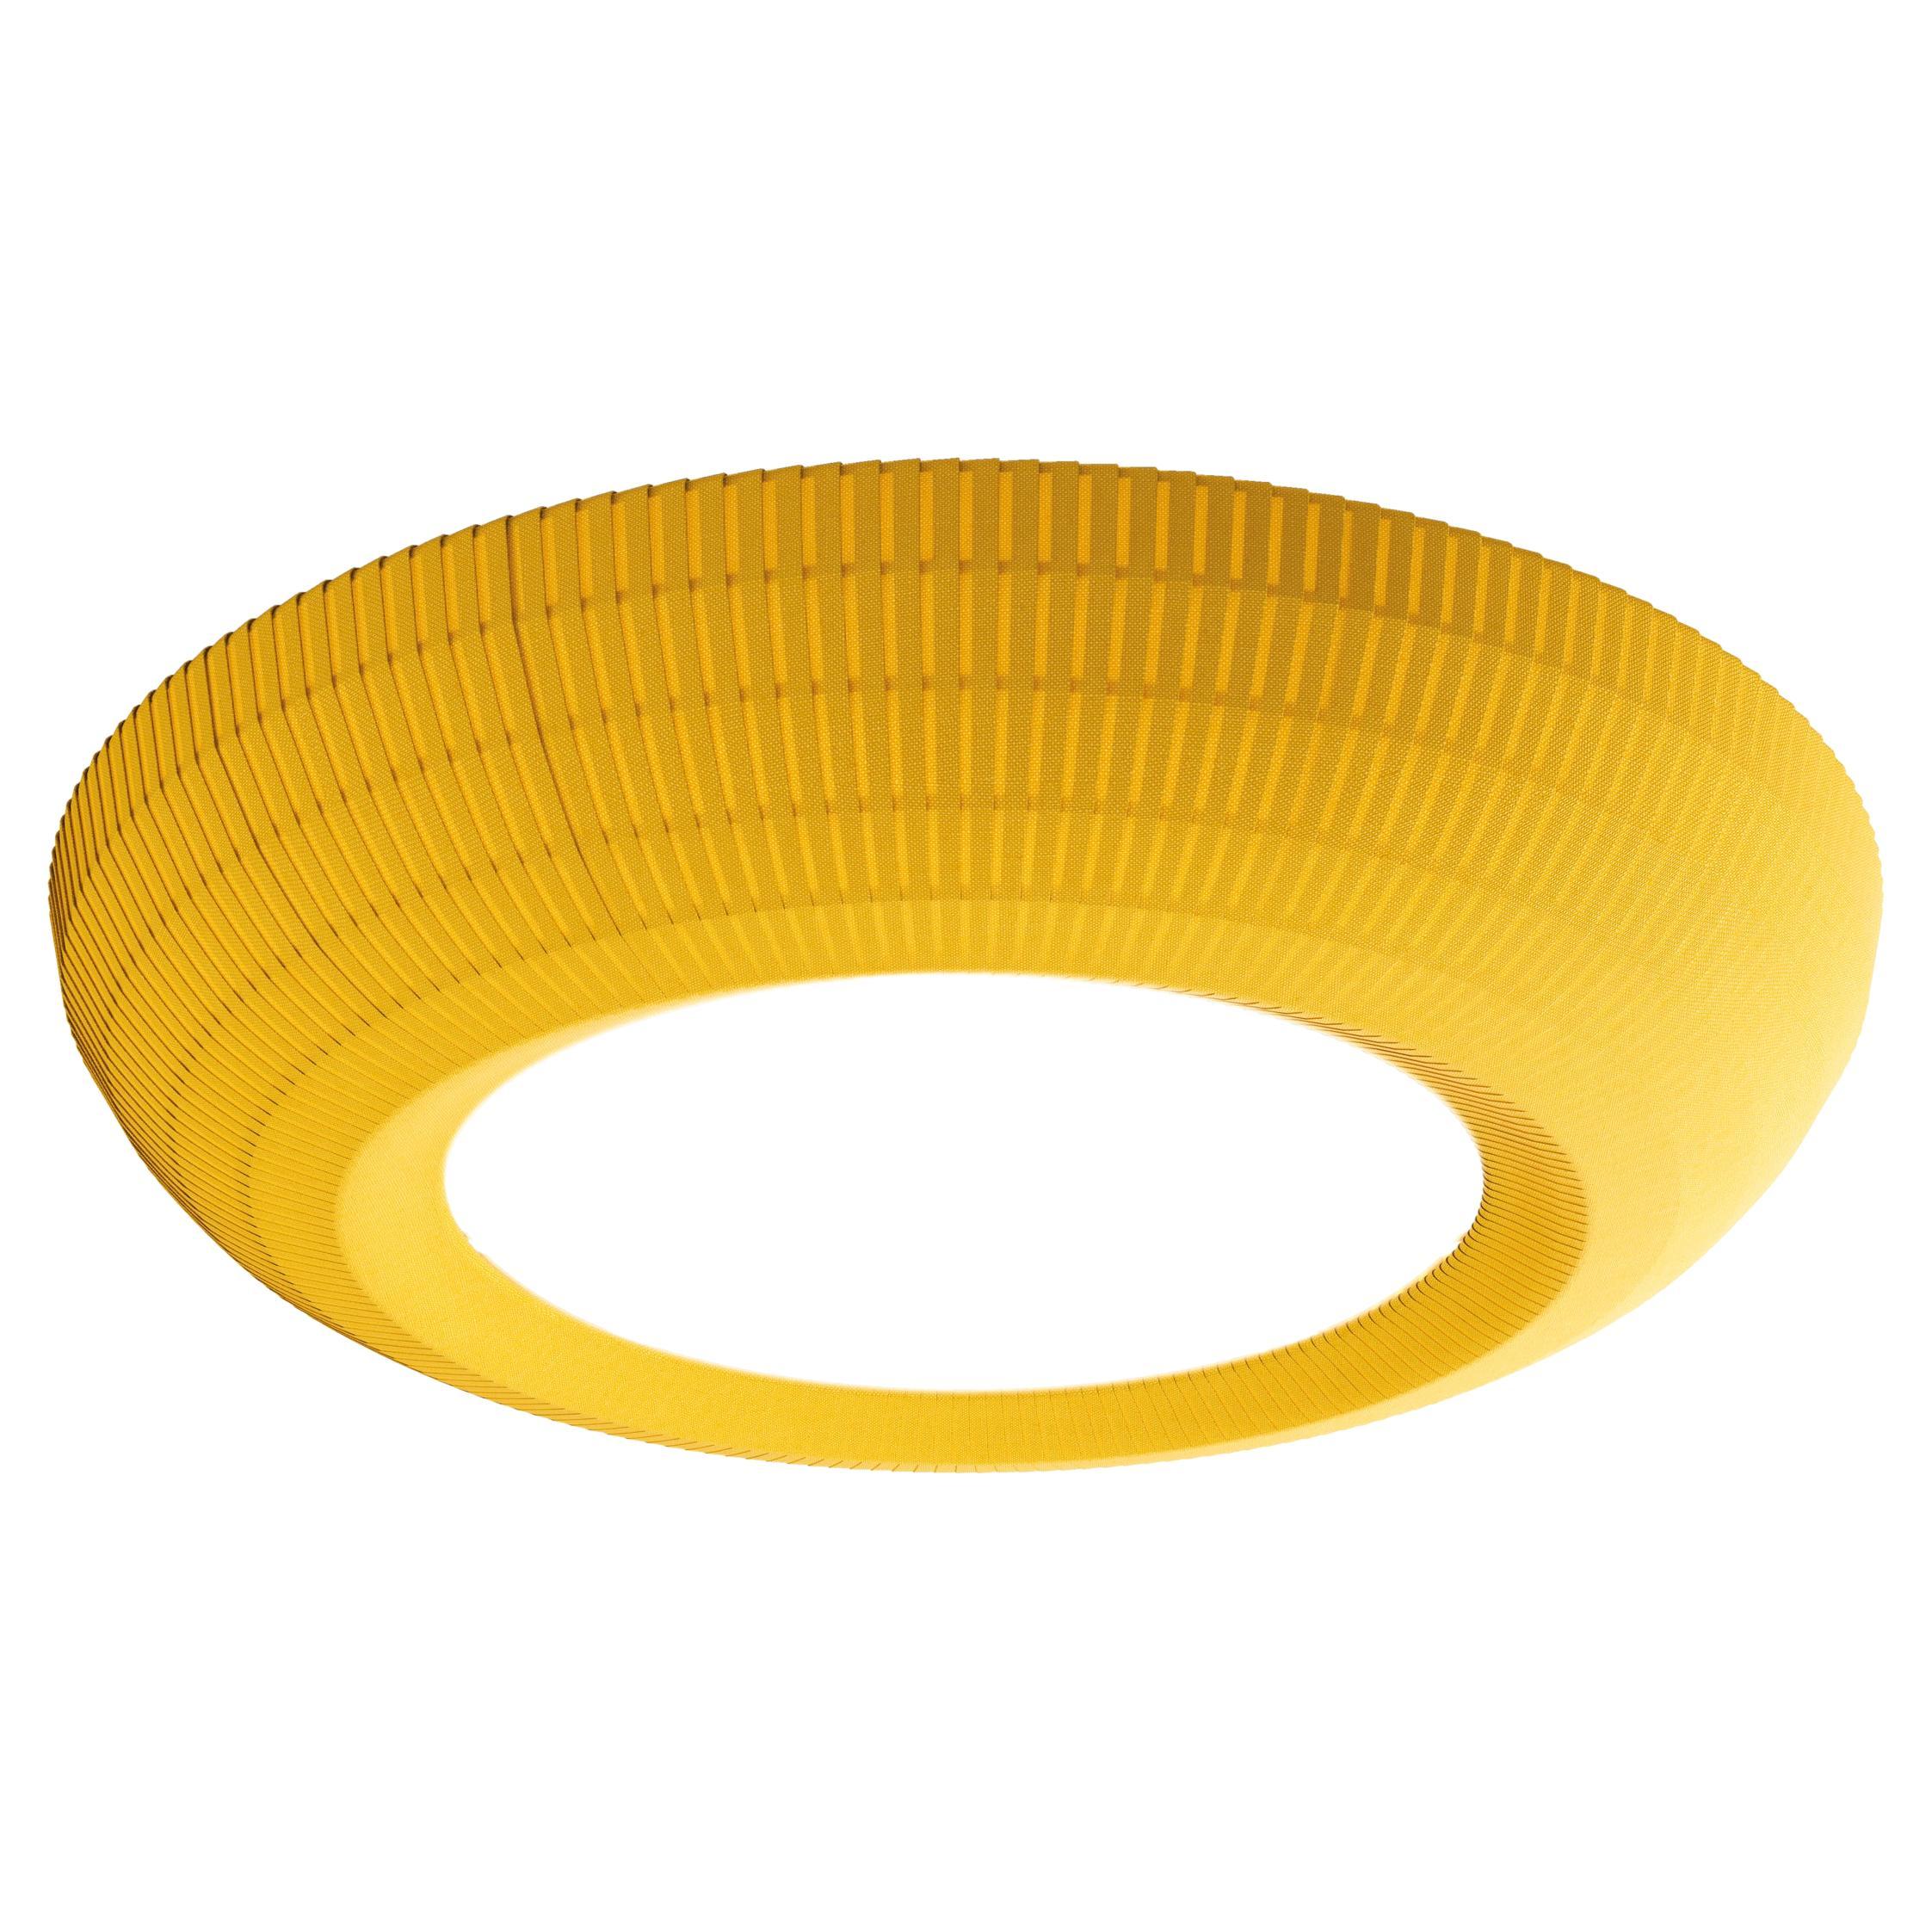 Axolight Bell Large Ceiling Lamp in Yellow by Manuel & Vanessa Vivian For Sale